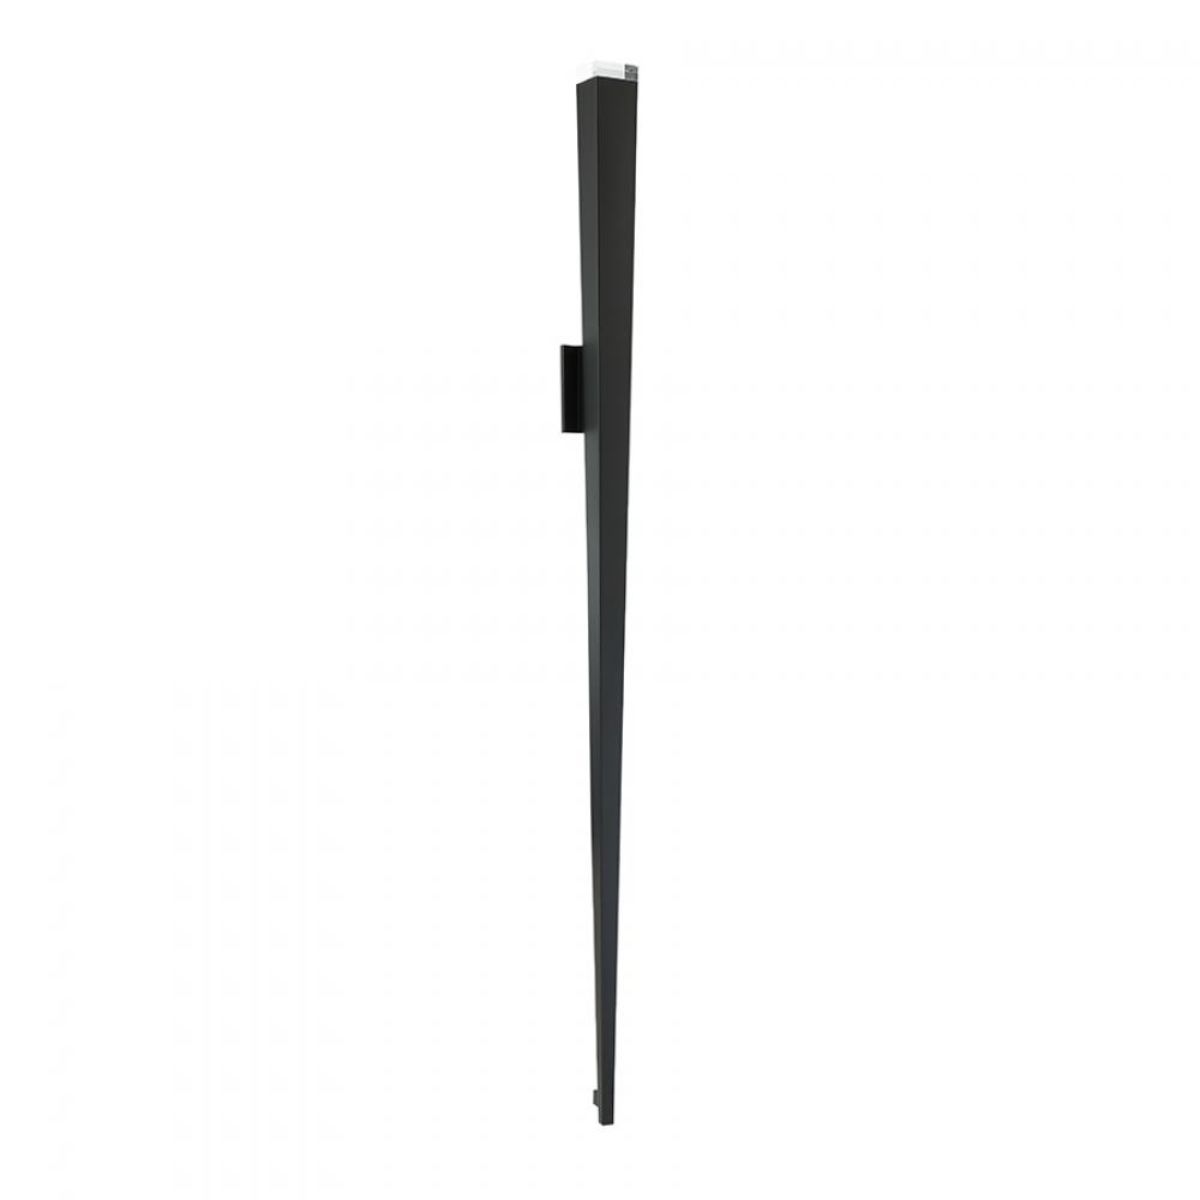 Staff 70 in. LED Armed Sconce Black finish